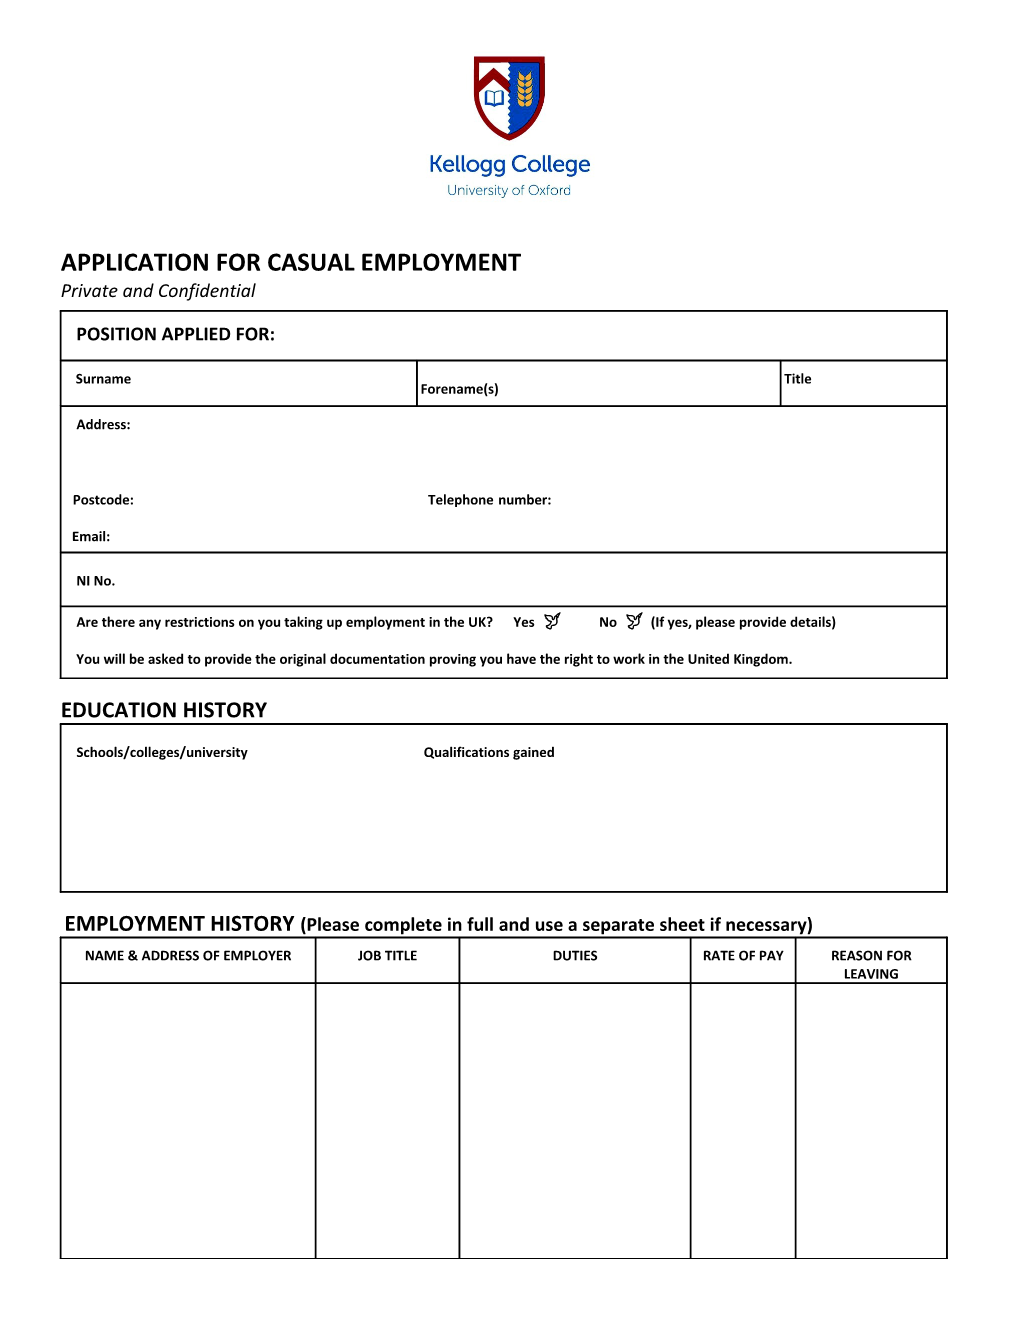 Application for Employment s122